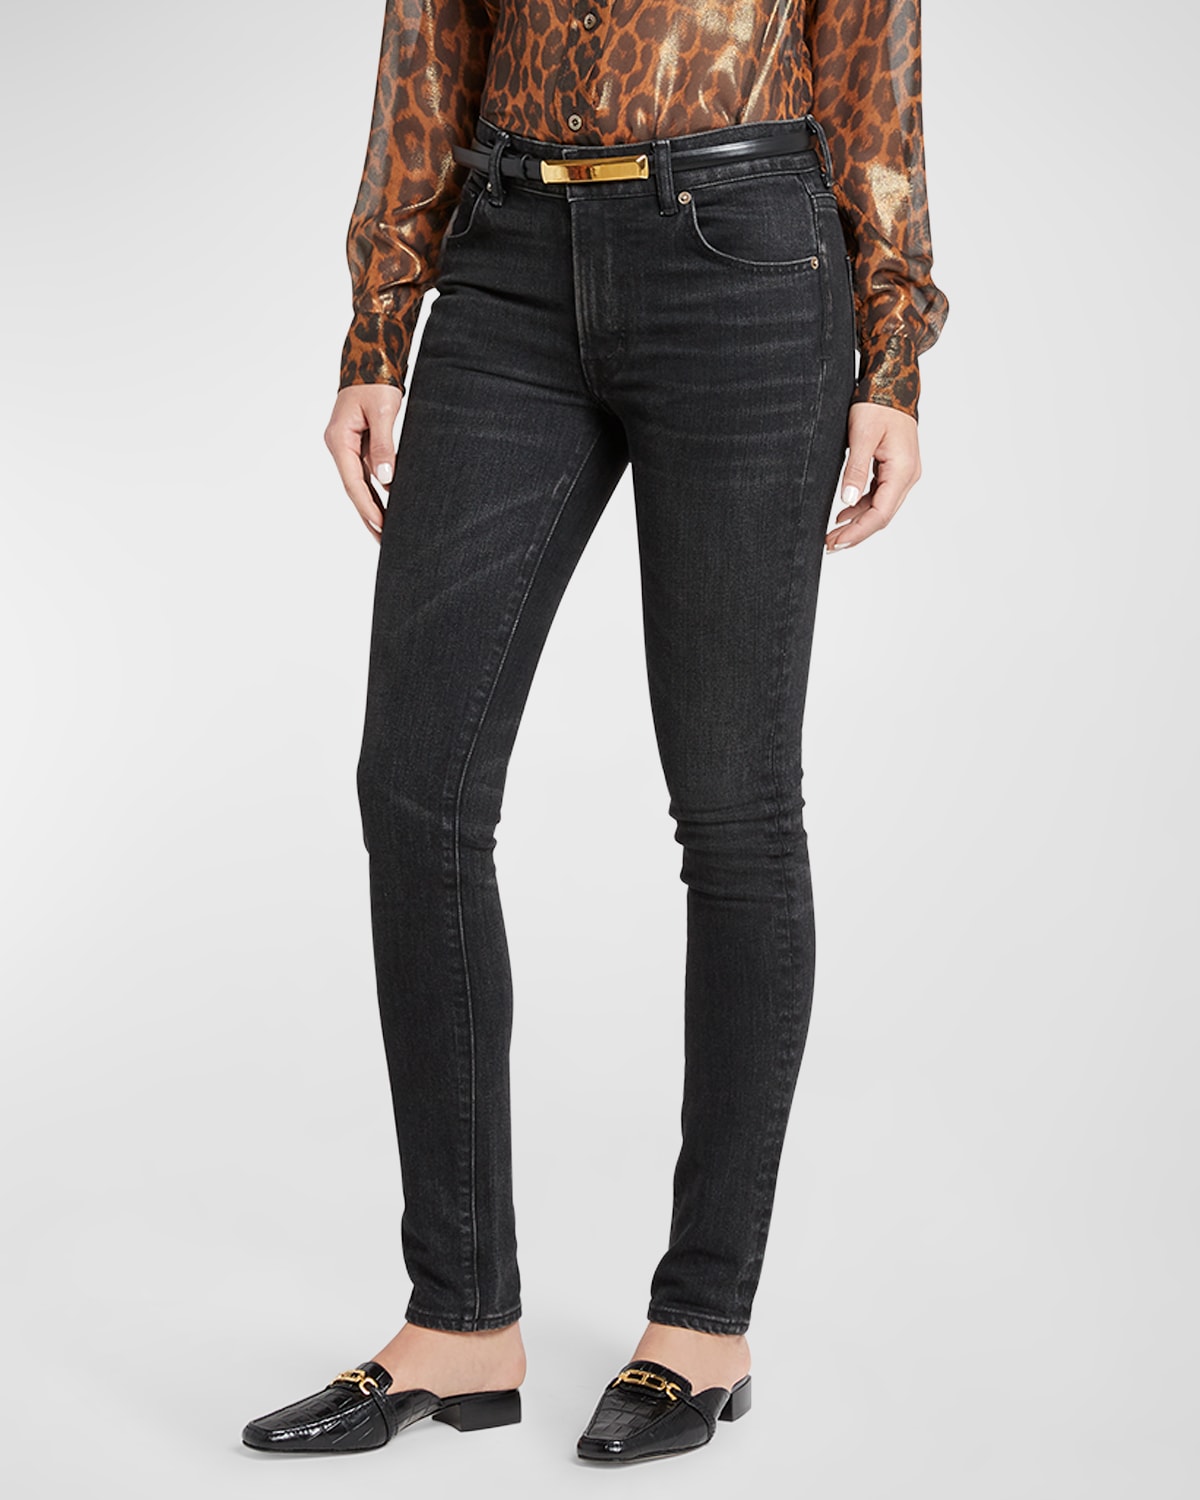 TOM FORD Sequined Zip-Cuff Leggings